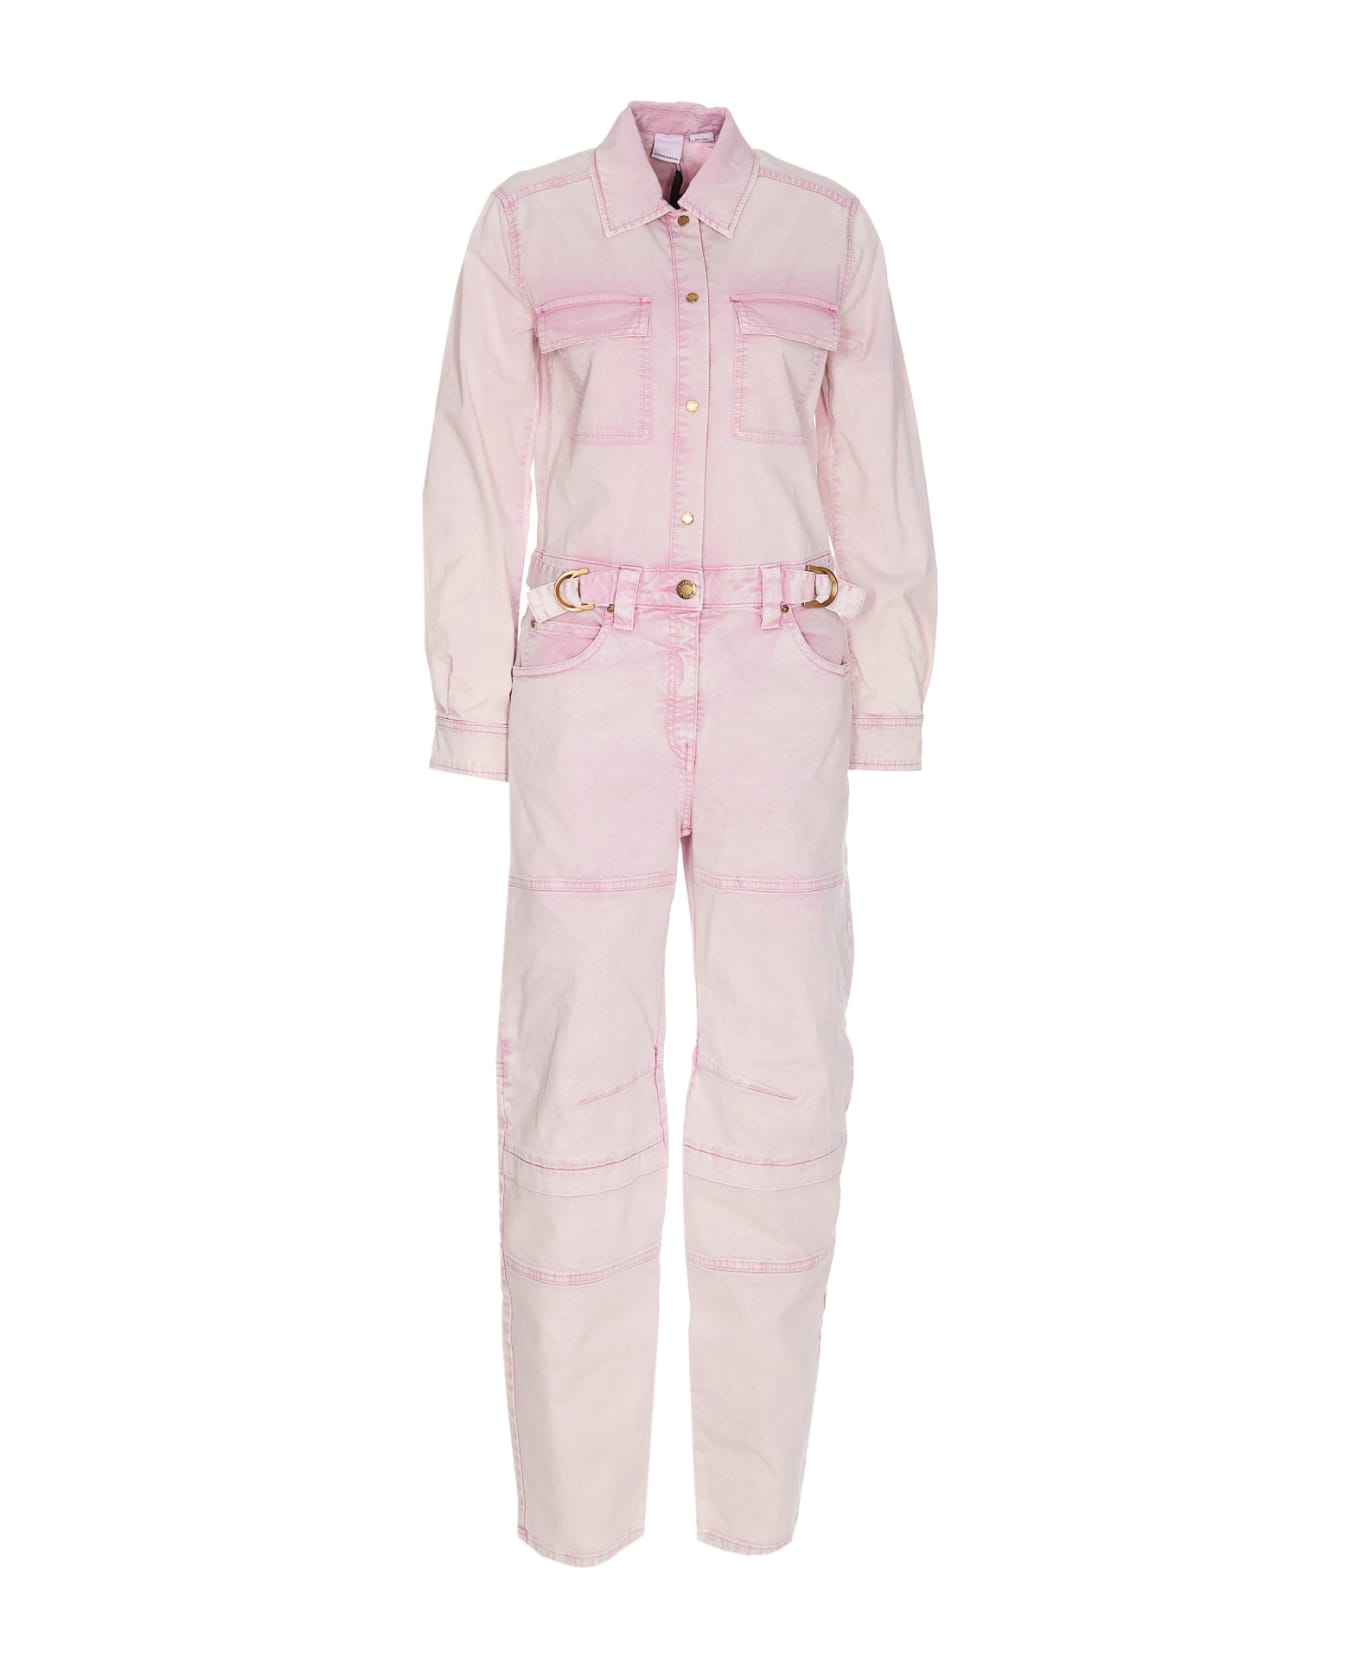 Pinko Barcis Suit - Pink